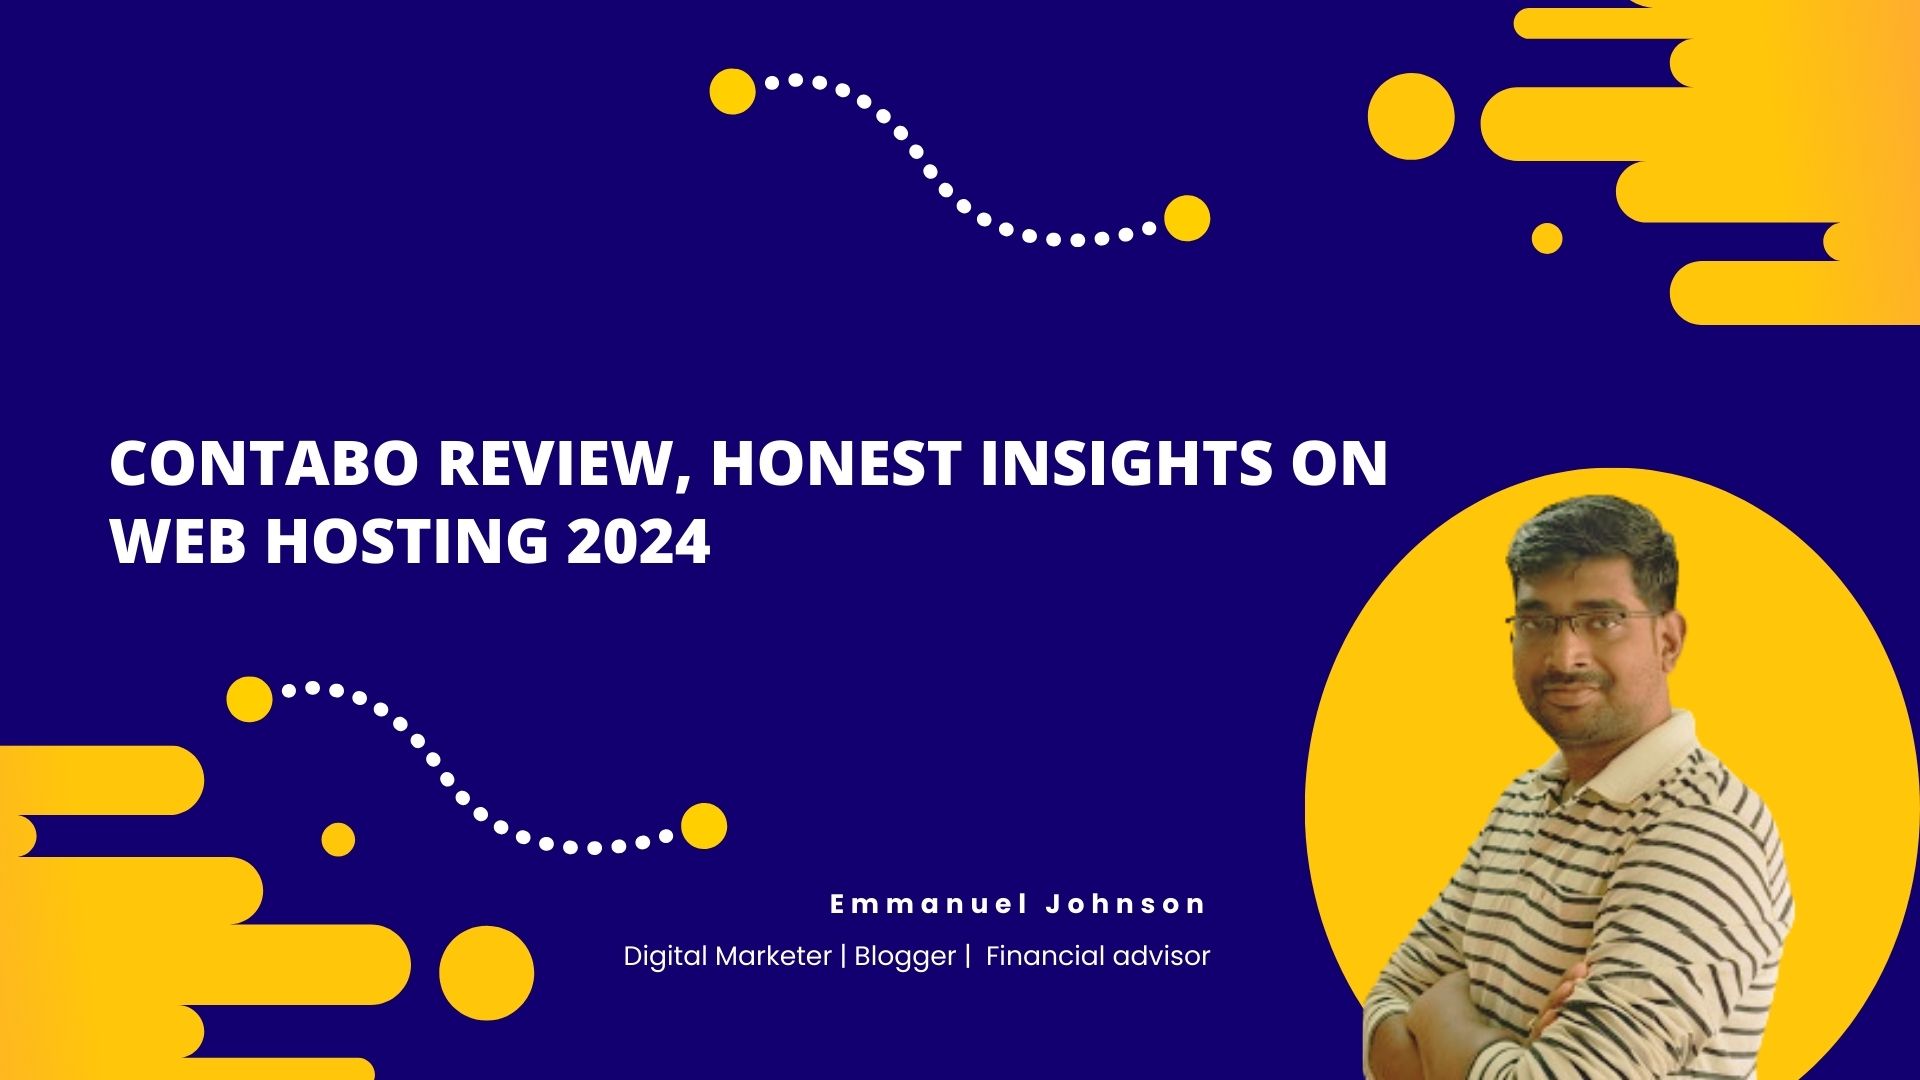 Contabo Review, Honest Insights on Web Hosting 2024